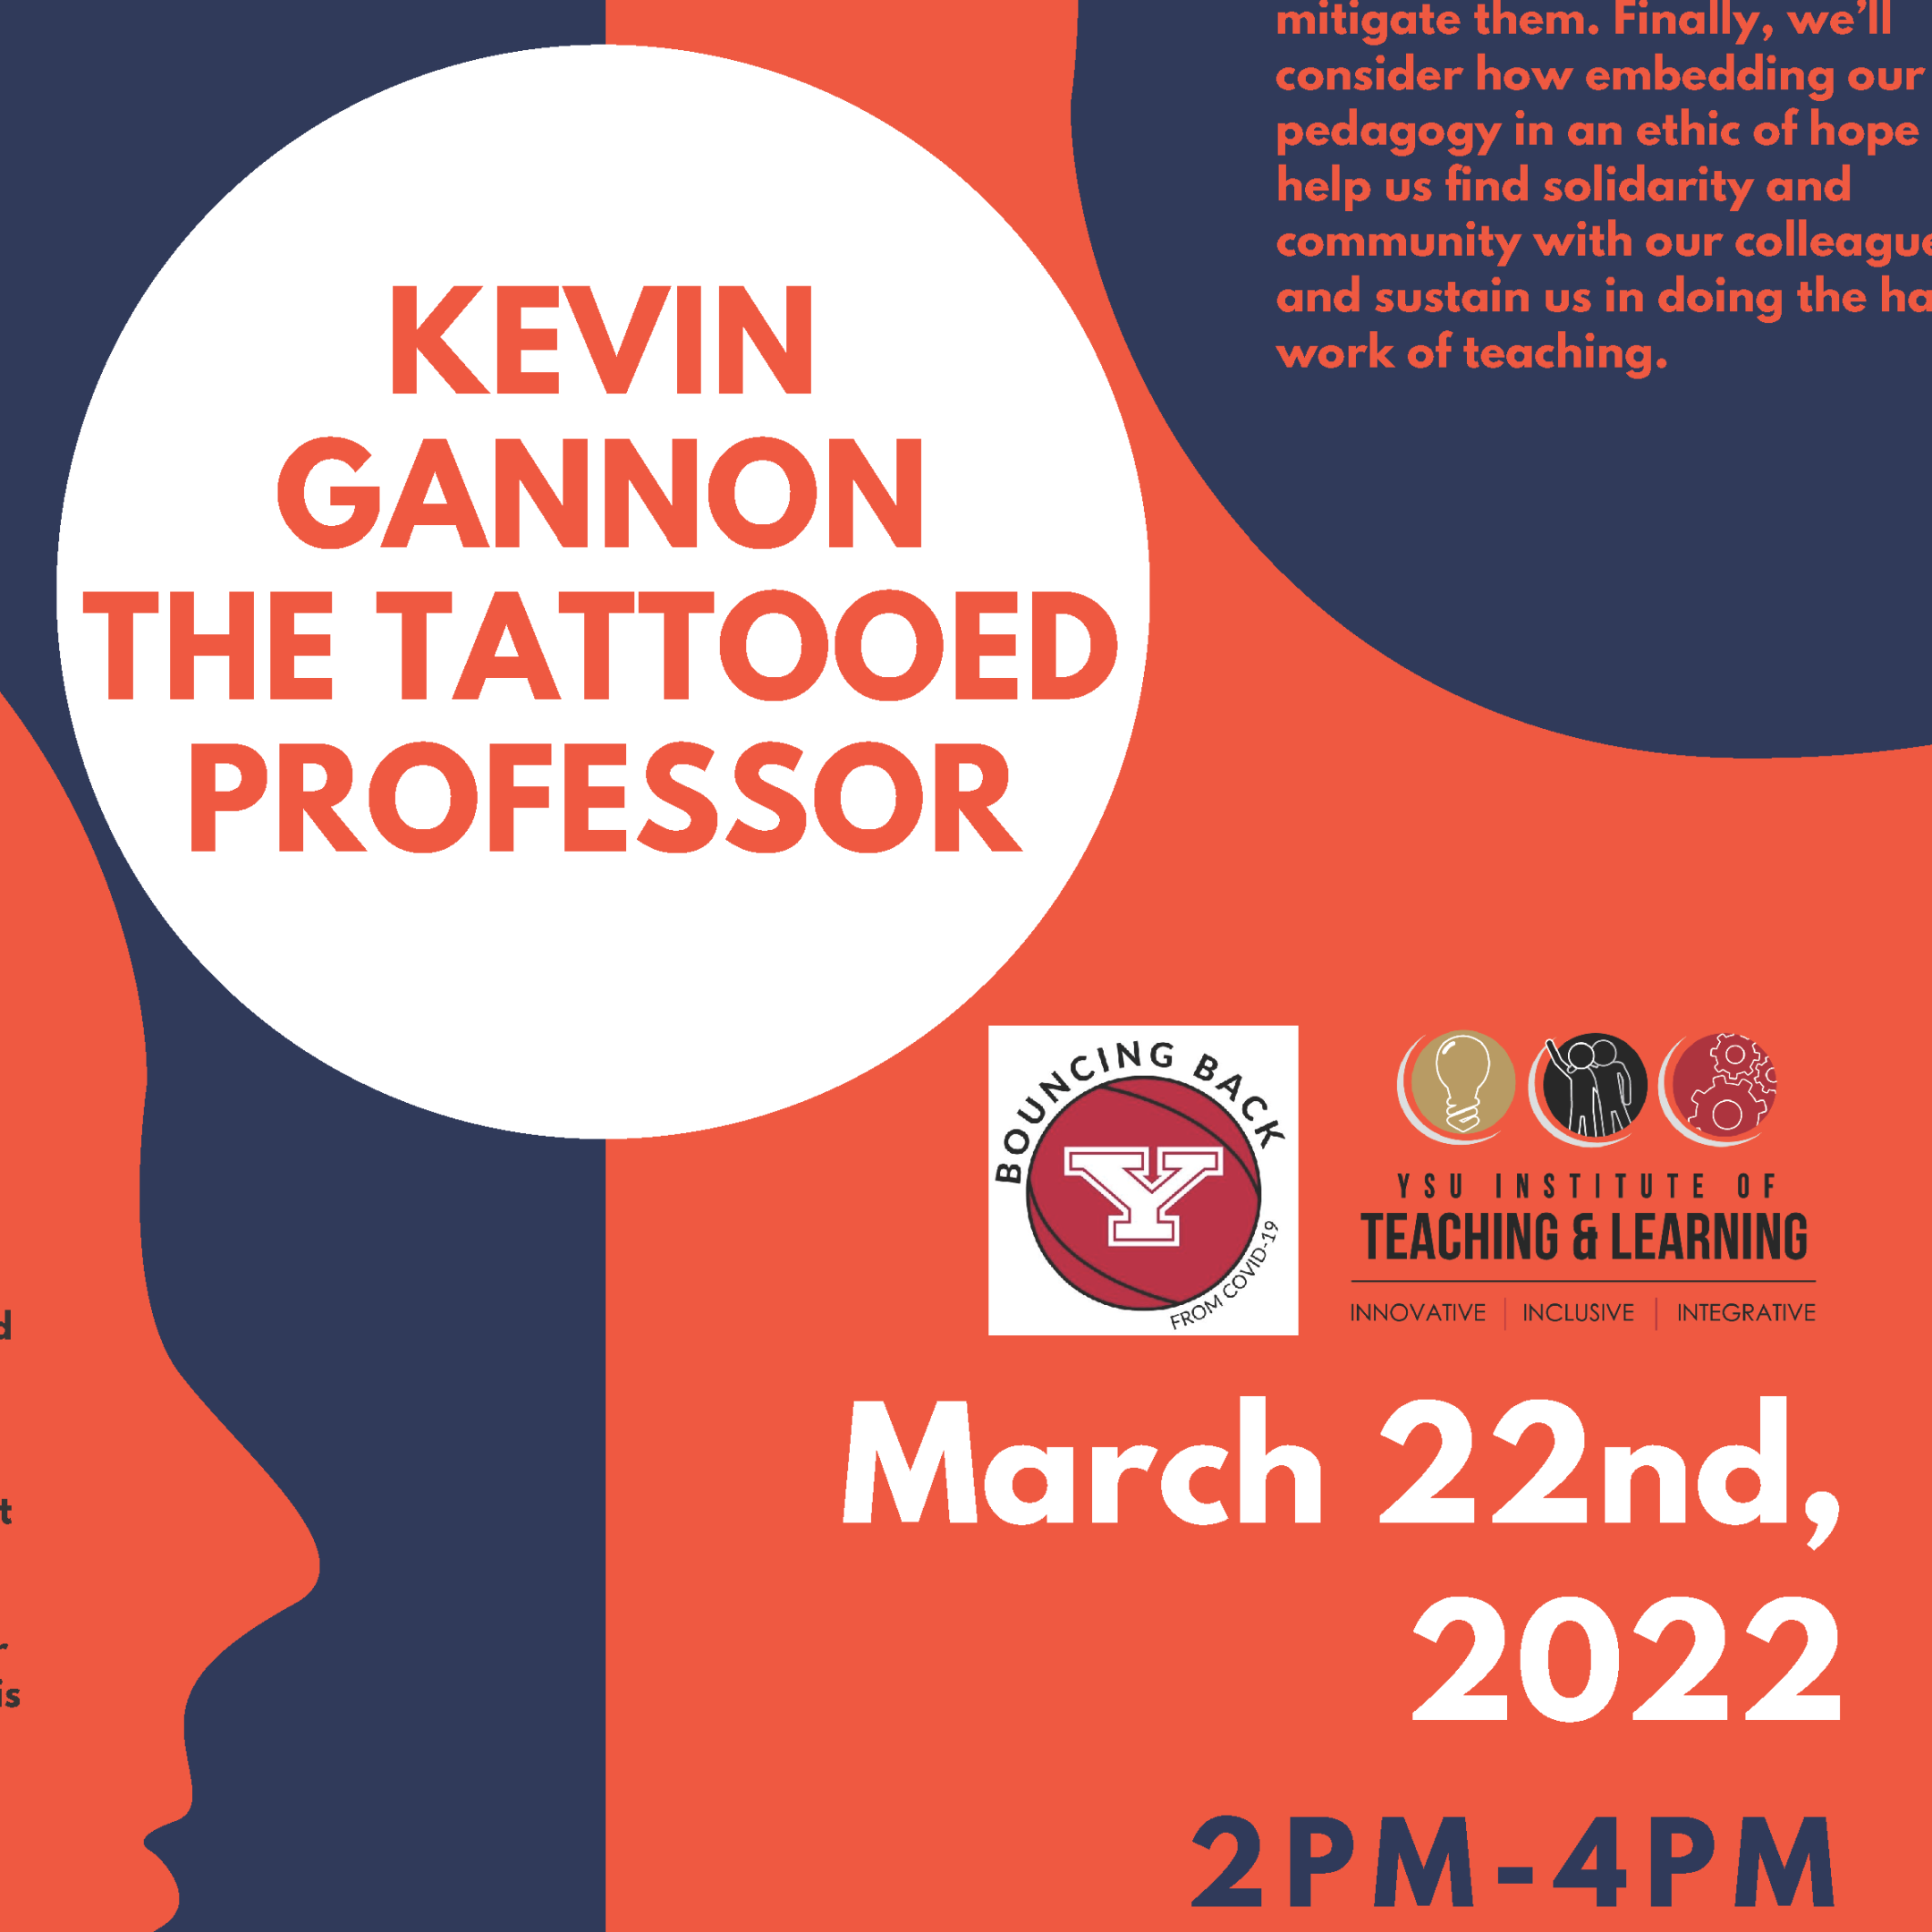 Kevin Gannon March 22nd 2:00 - 4:00 p.m.